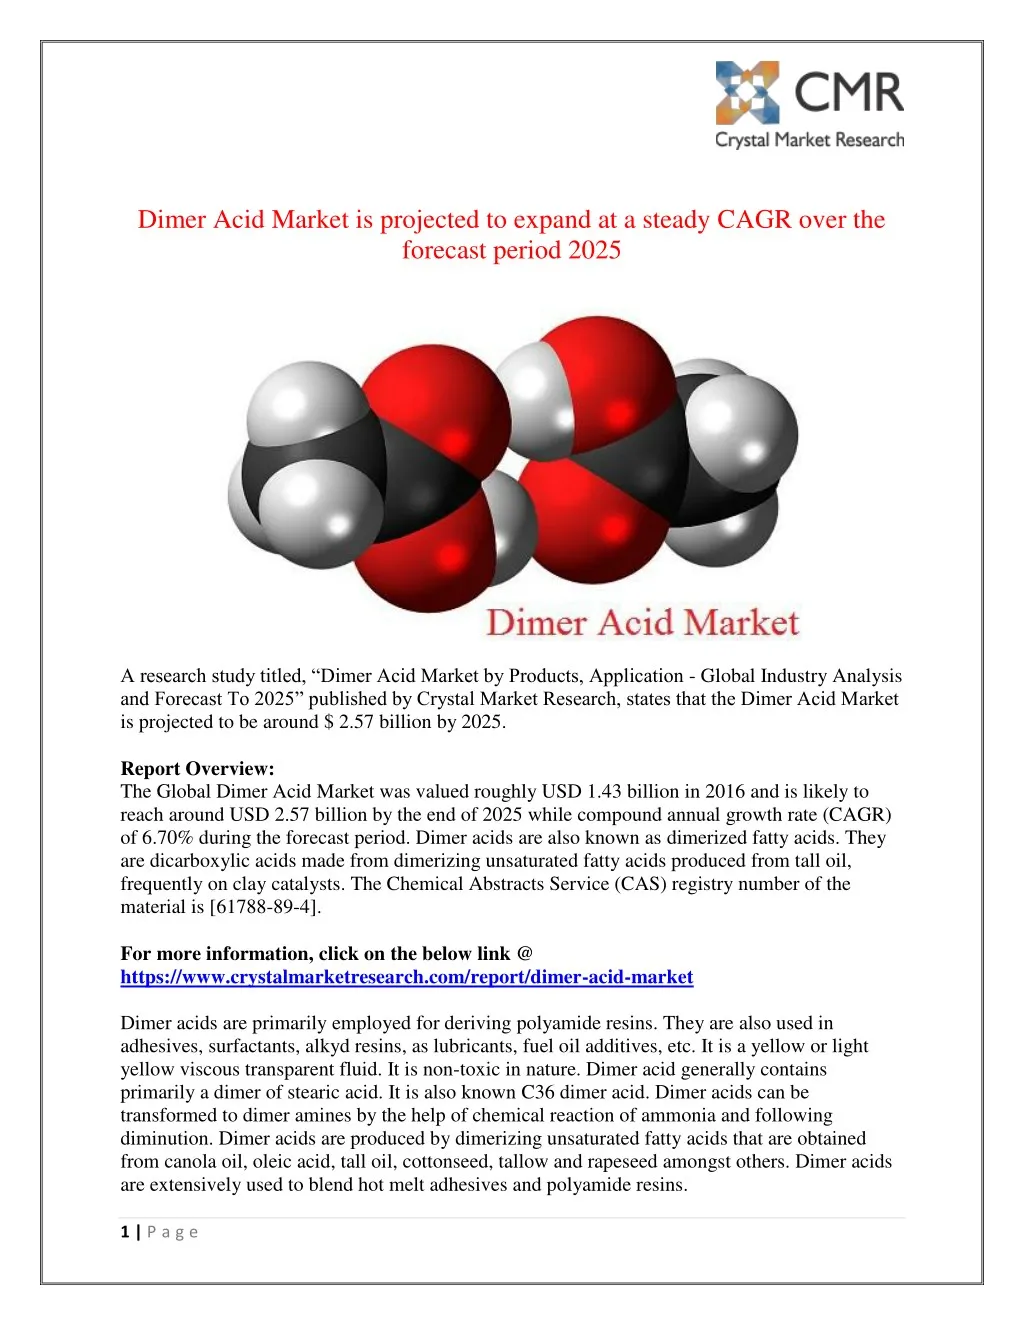 dimer acid market is projected to expand